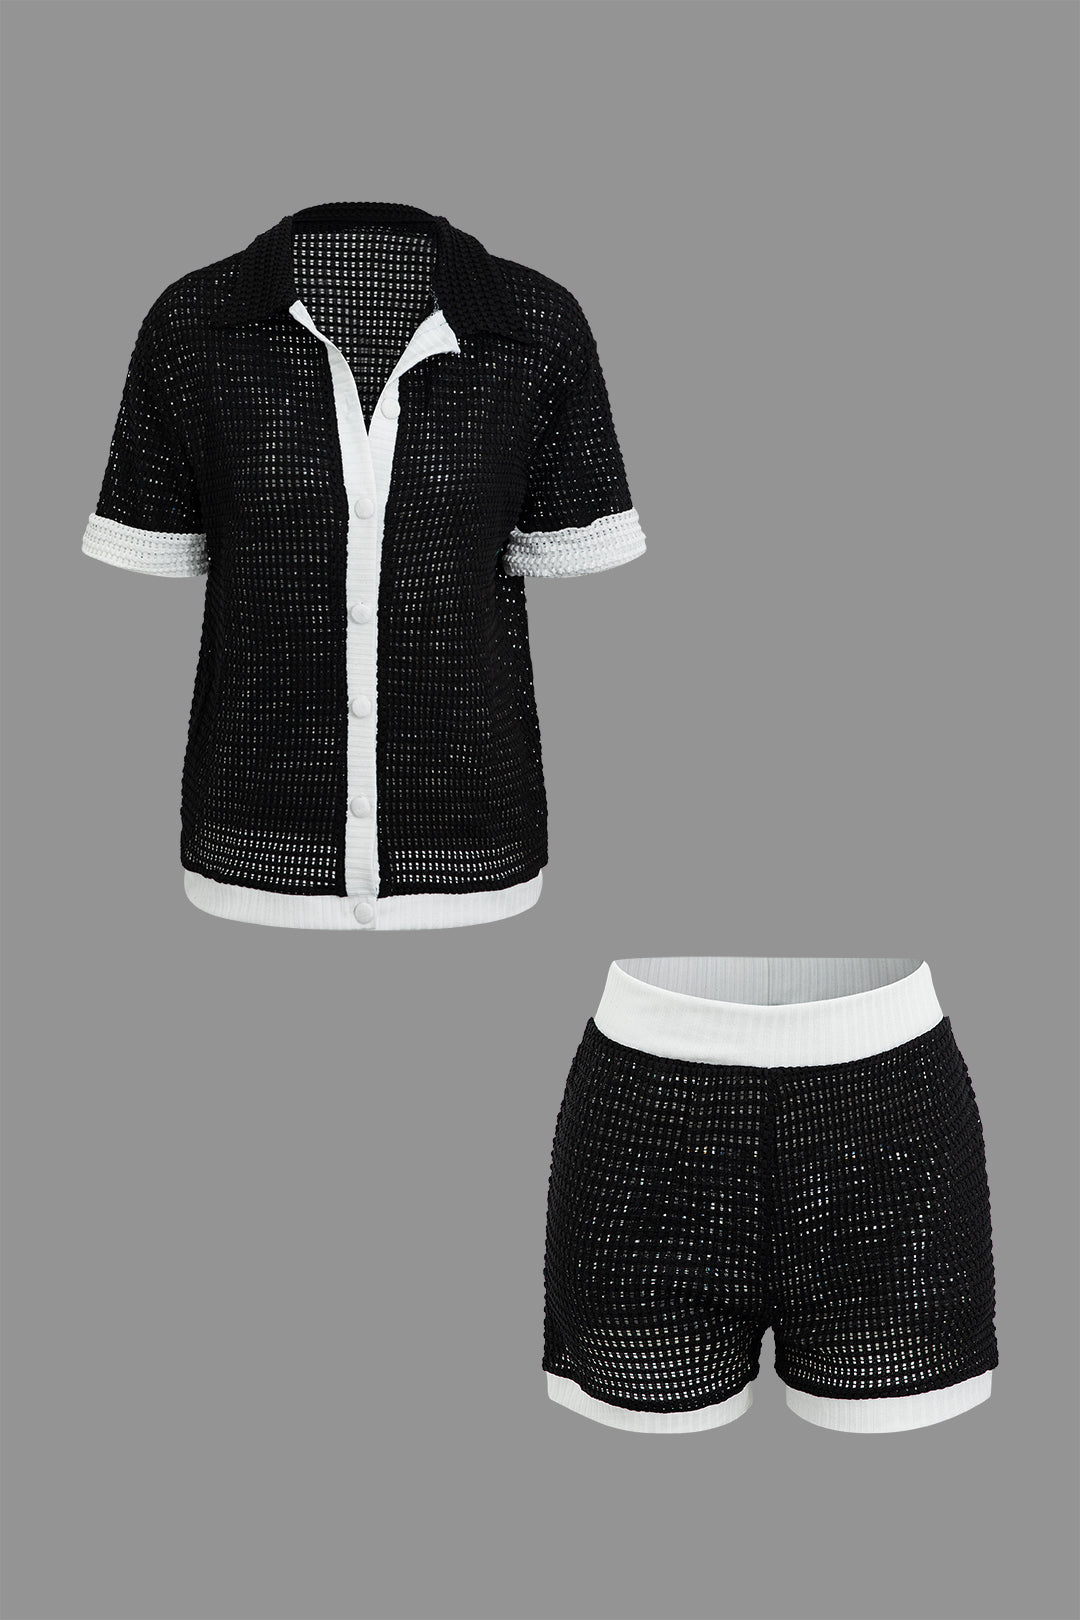 Contrast Collared Button Up Open Knit Shirt And Shorts Set